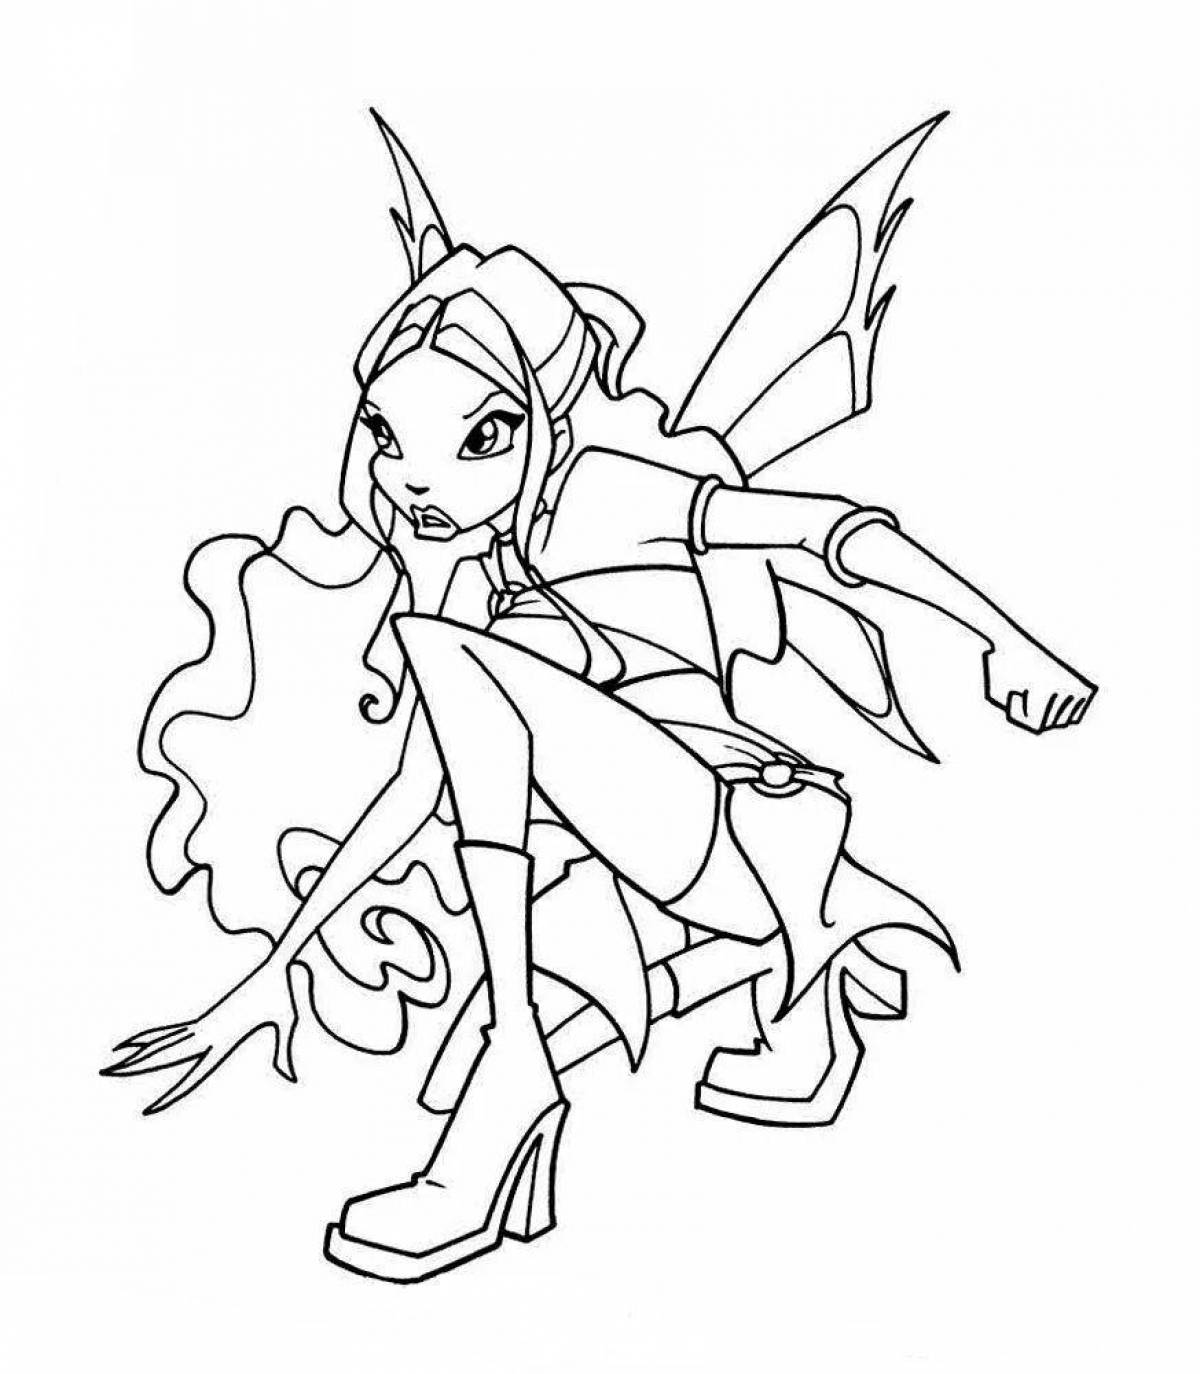 Coloring page charming leyla